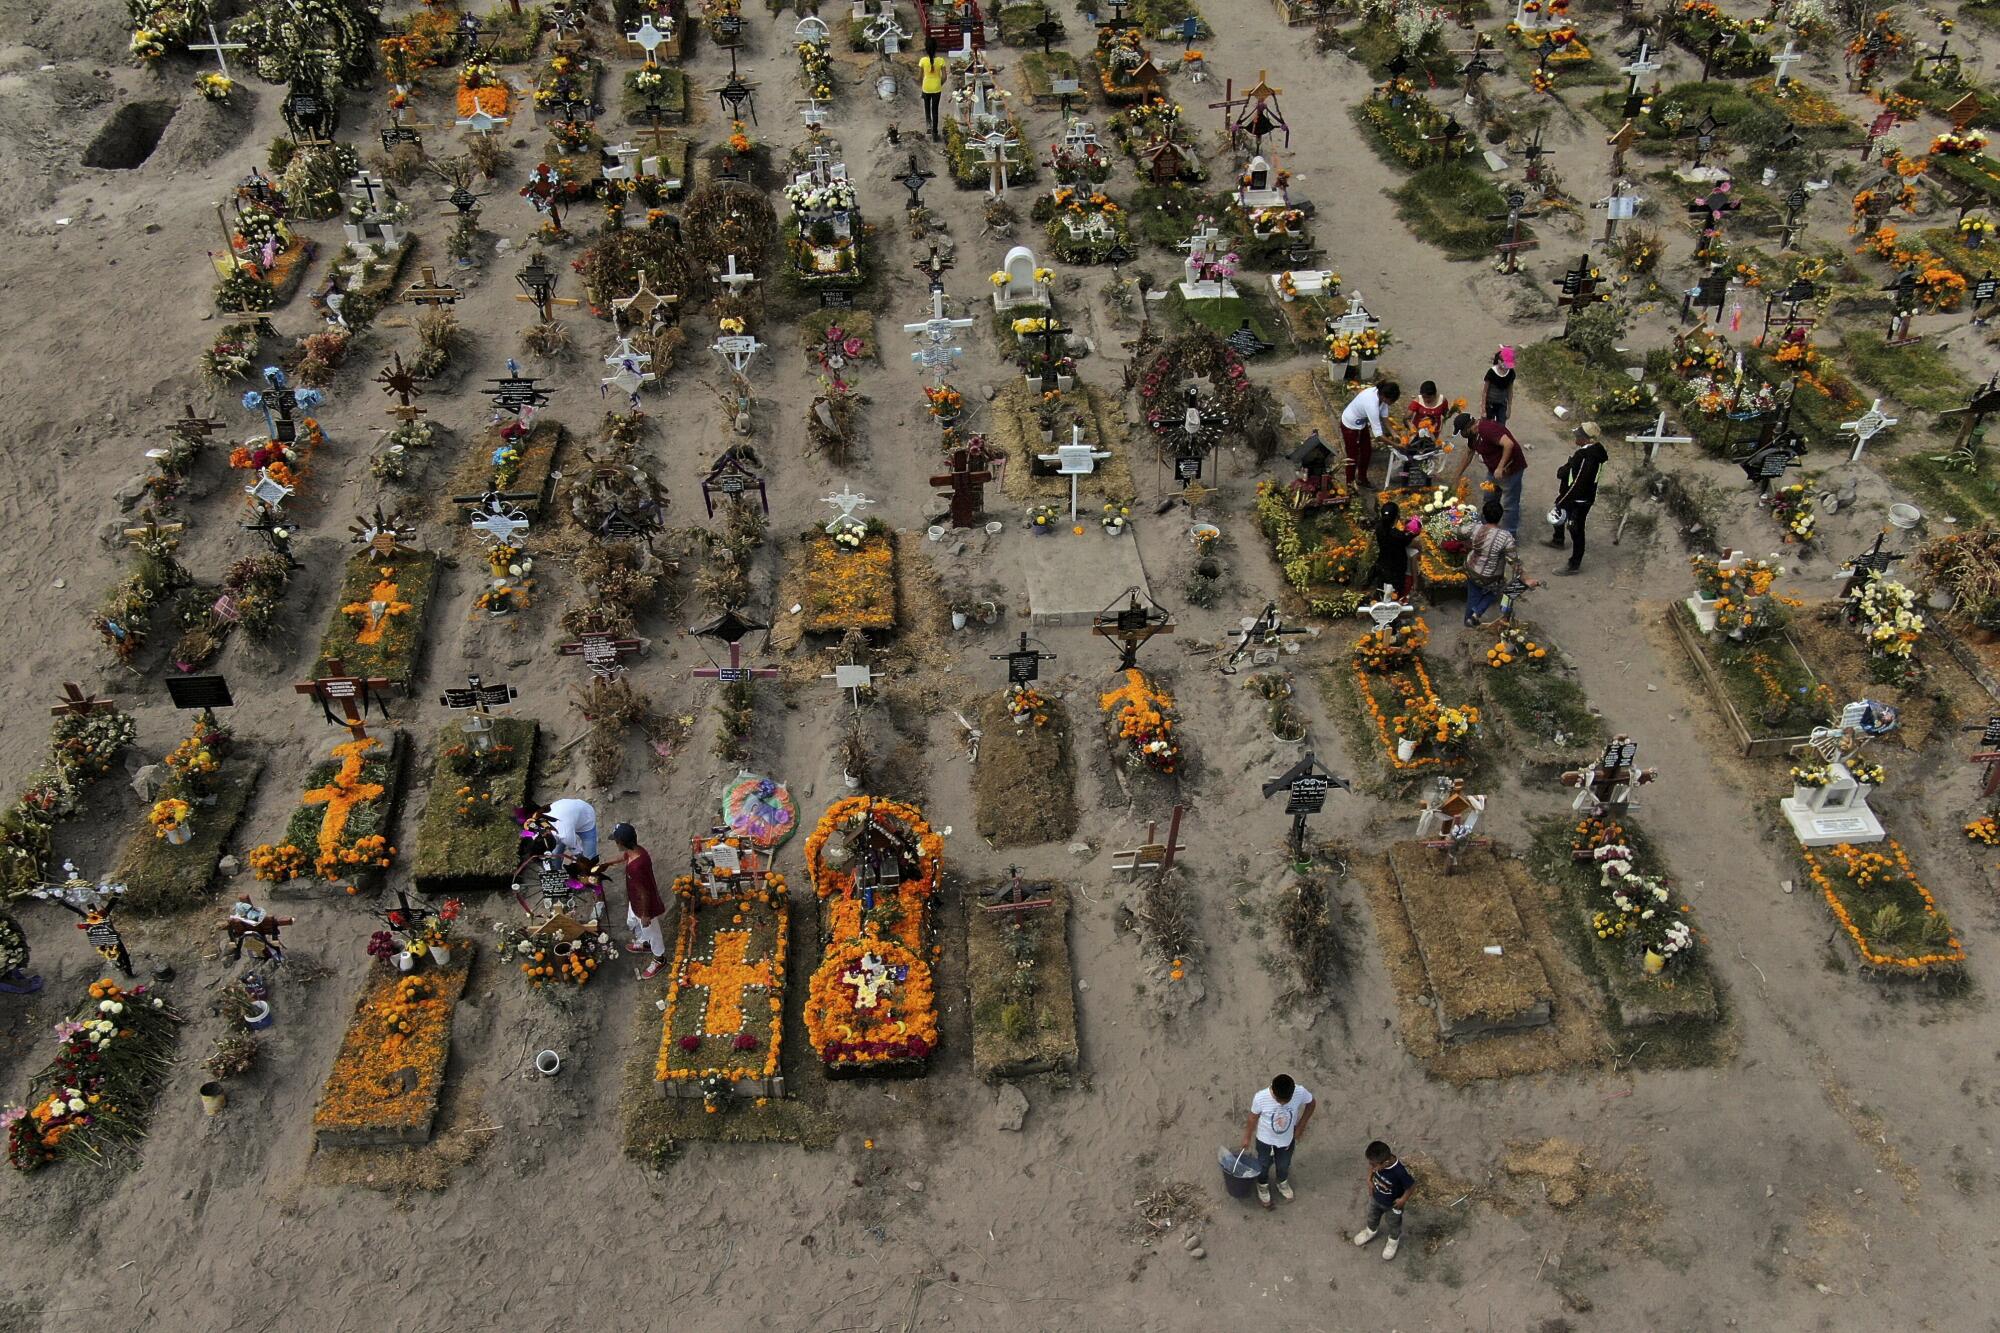 An aerial view of rows of graves adorned with flowers in a dirt graveyard